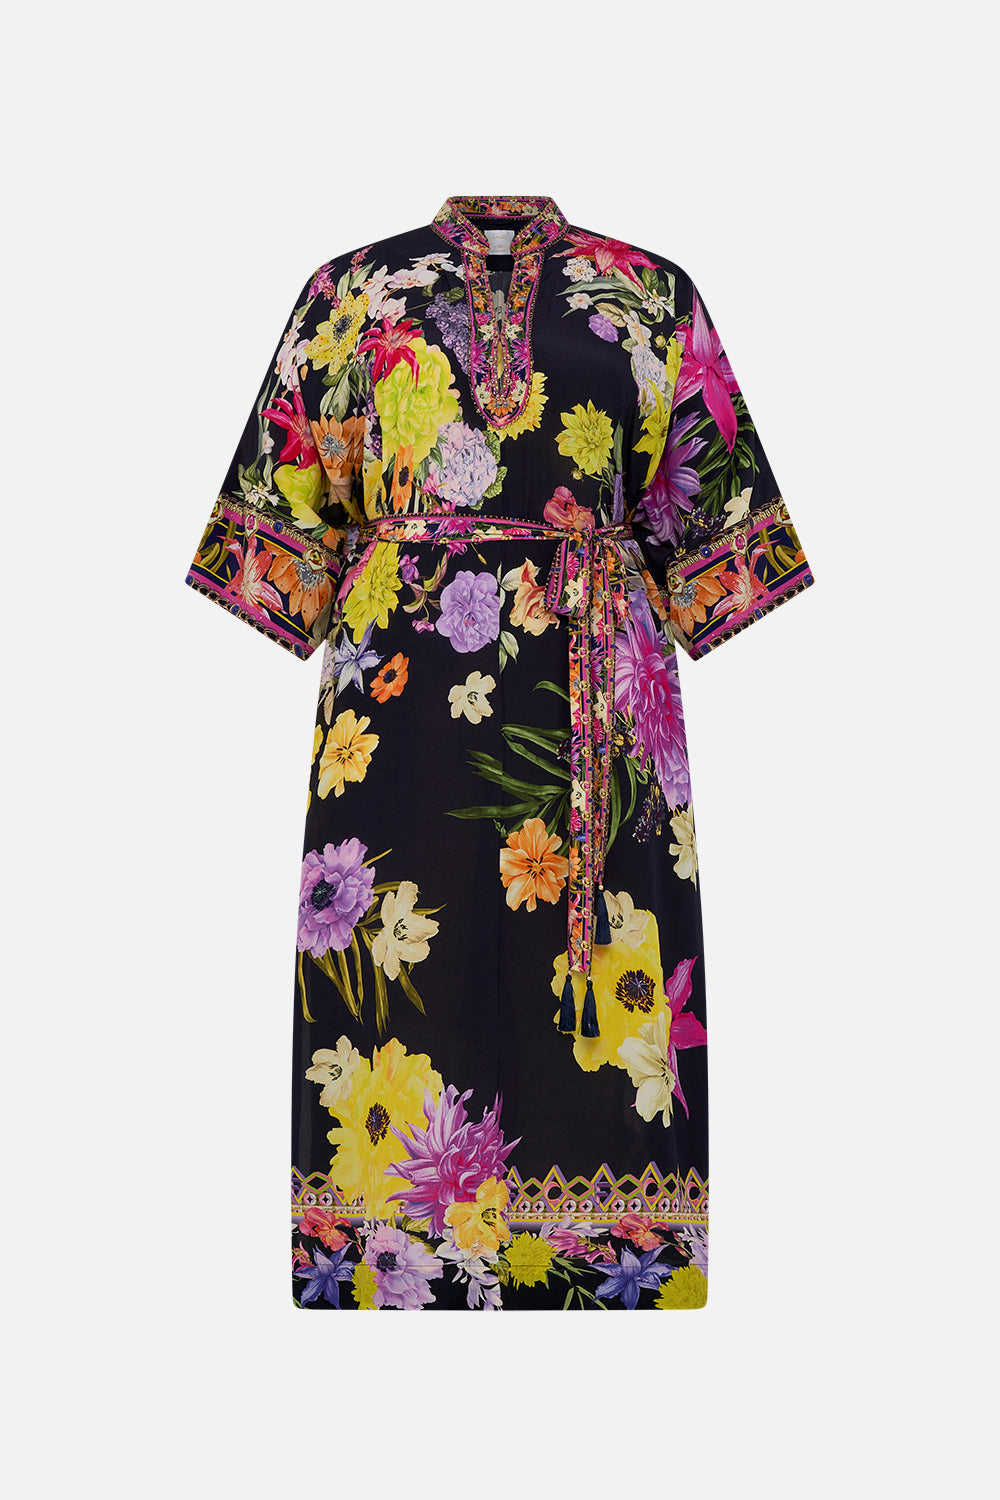 CAMILLA plus size floral kaftan in Peace Be With You print